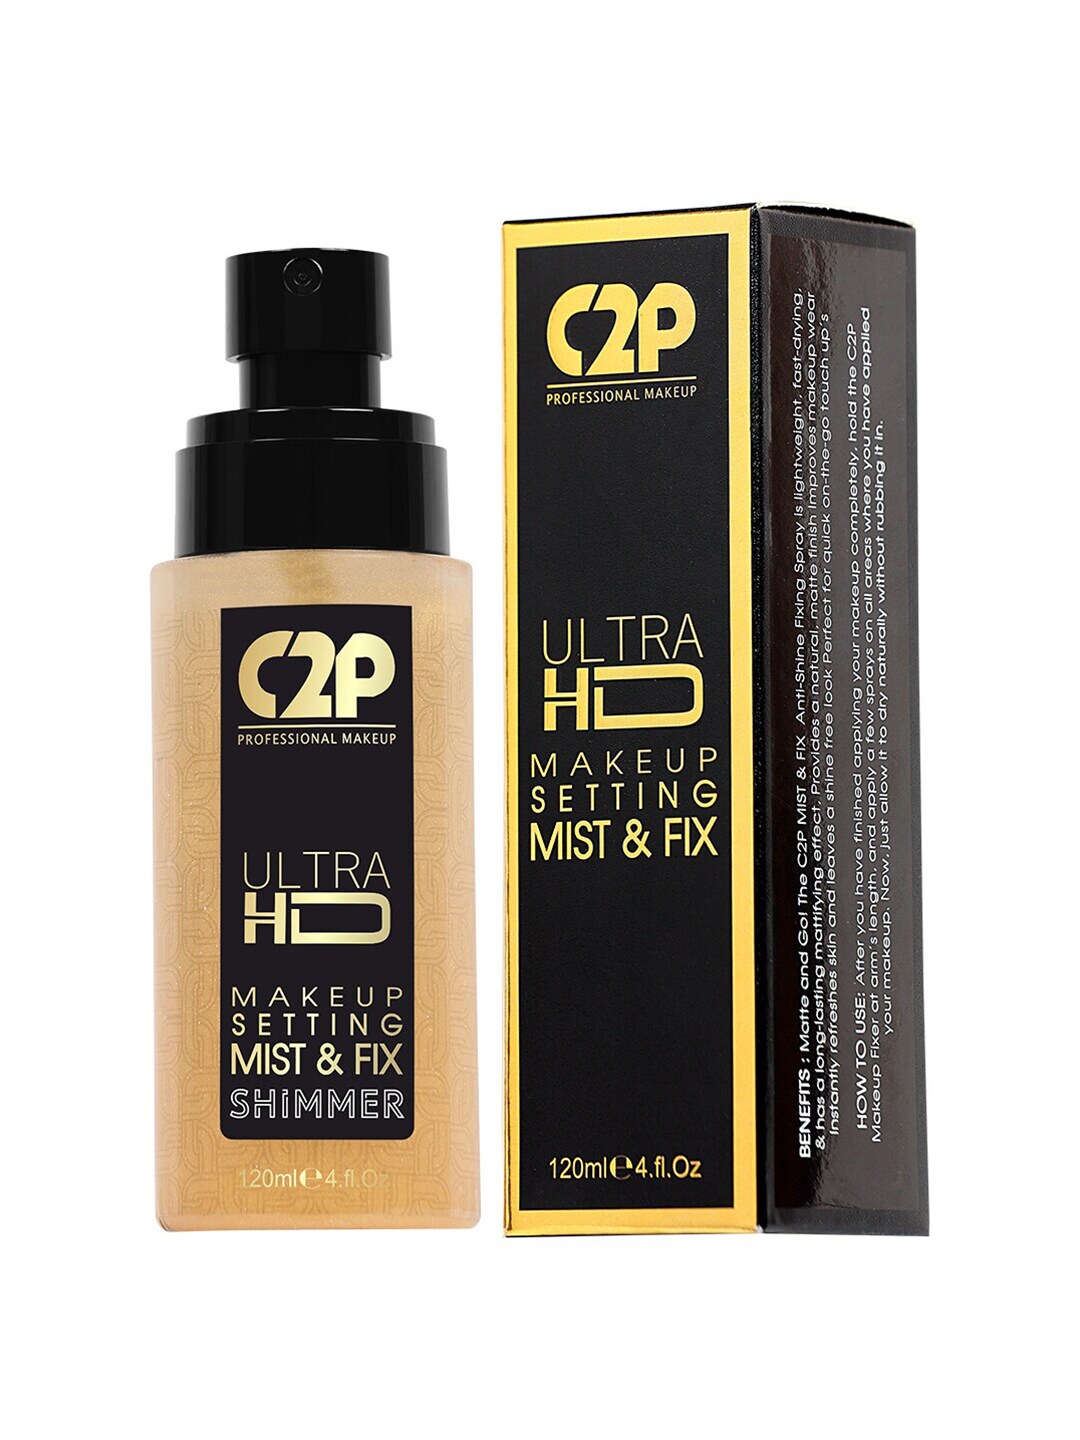 C2P PROFESSIONAL MAKEUP Ultra HD Makeup Setting Mist & Fix - Shimmer - Gold Goddess 02 Price in India